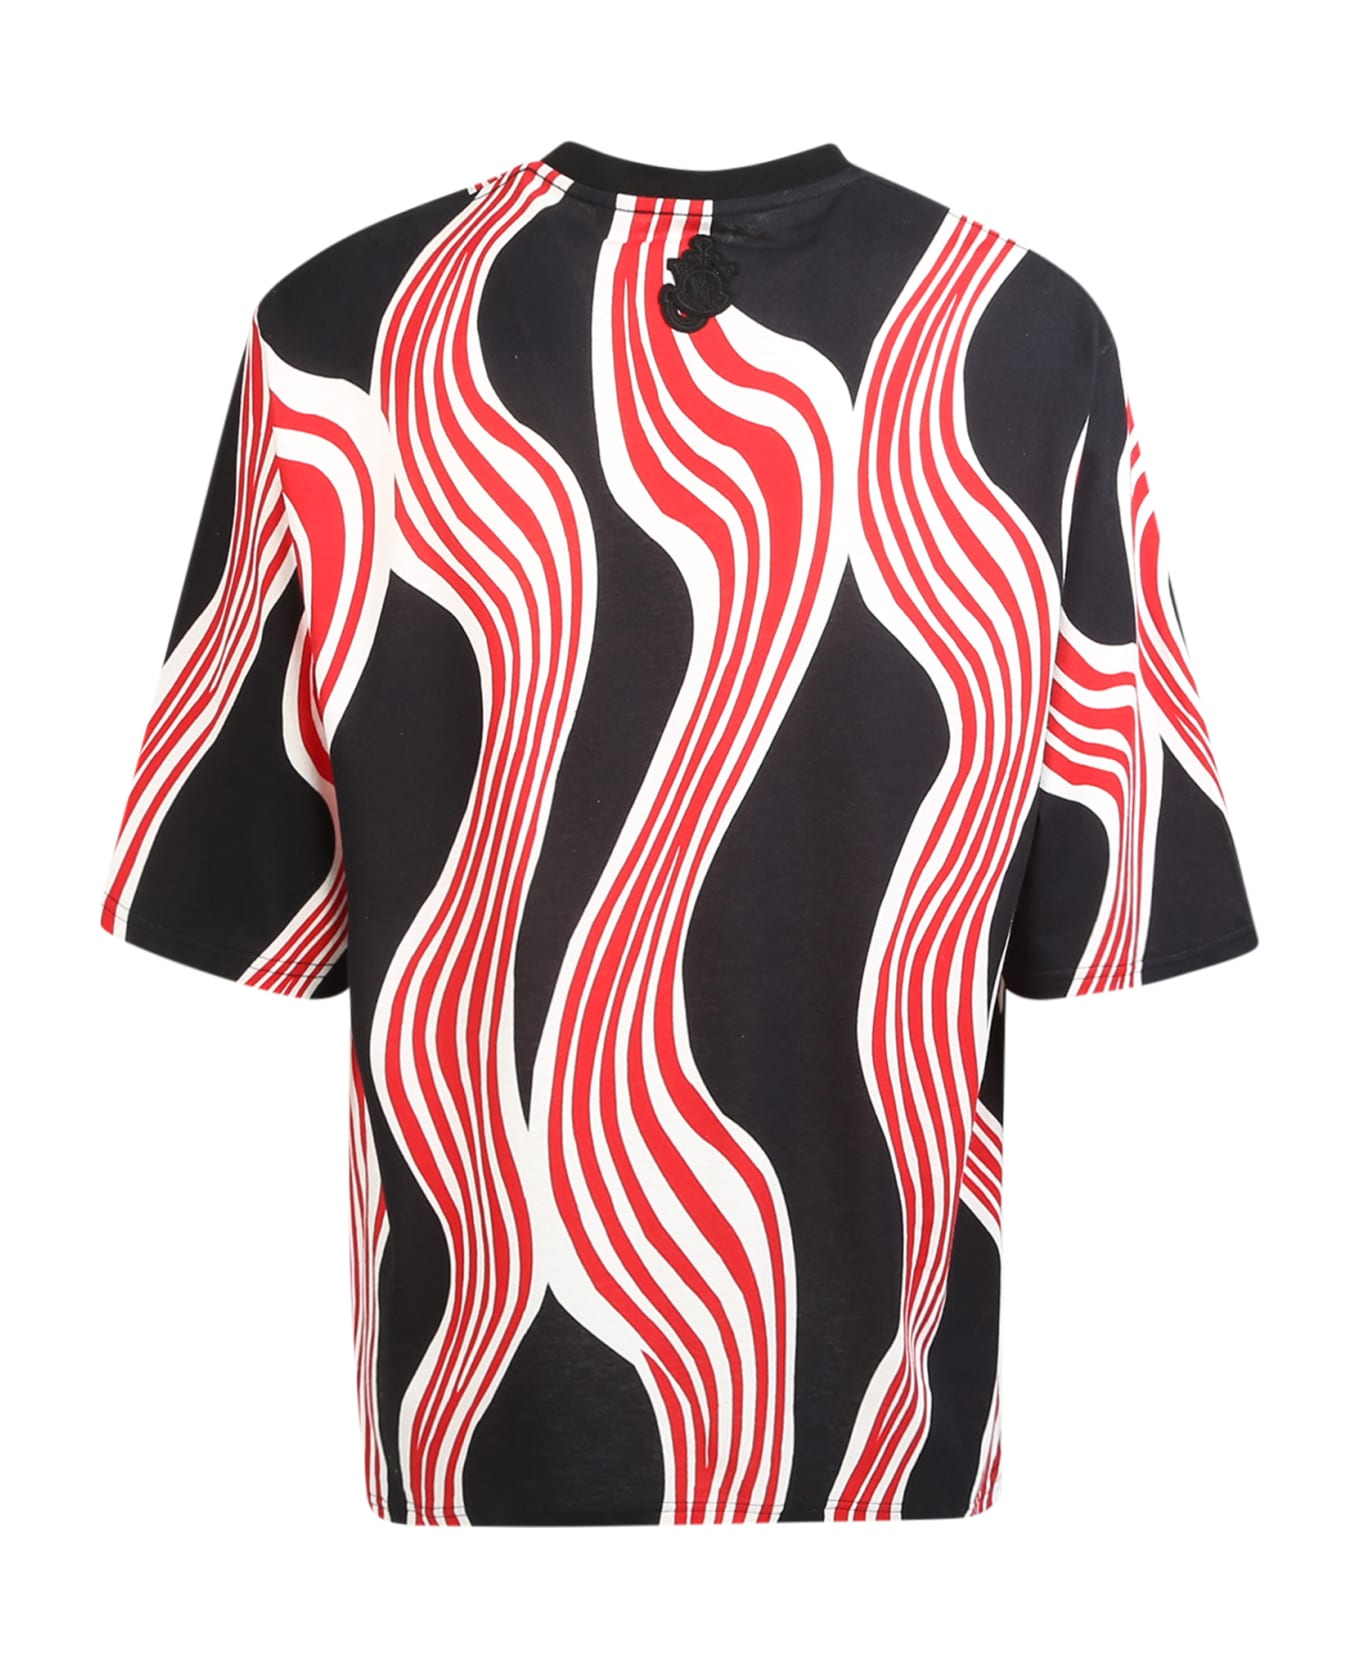 Moncler Genius Printed T-shirt - Moncler Jw Anderson - Red シャツ